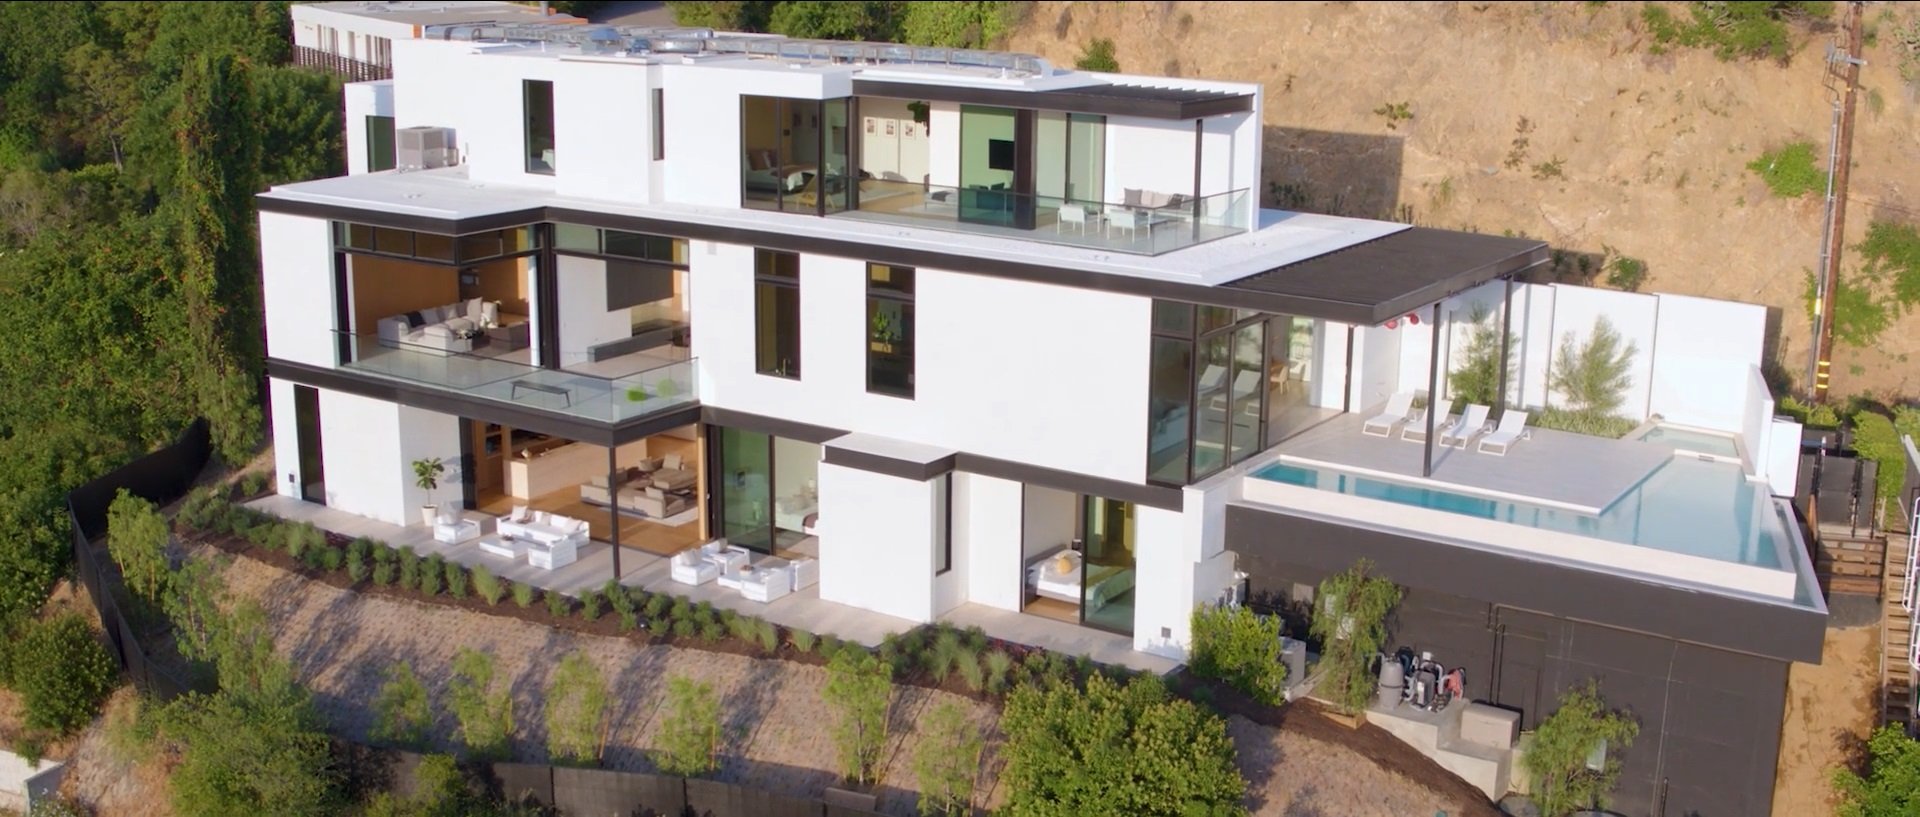 Ariana Grande Buys New Hollywood Hills Home For $13.7 Million - Internewscast